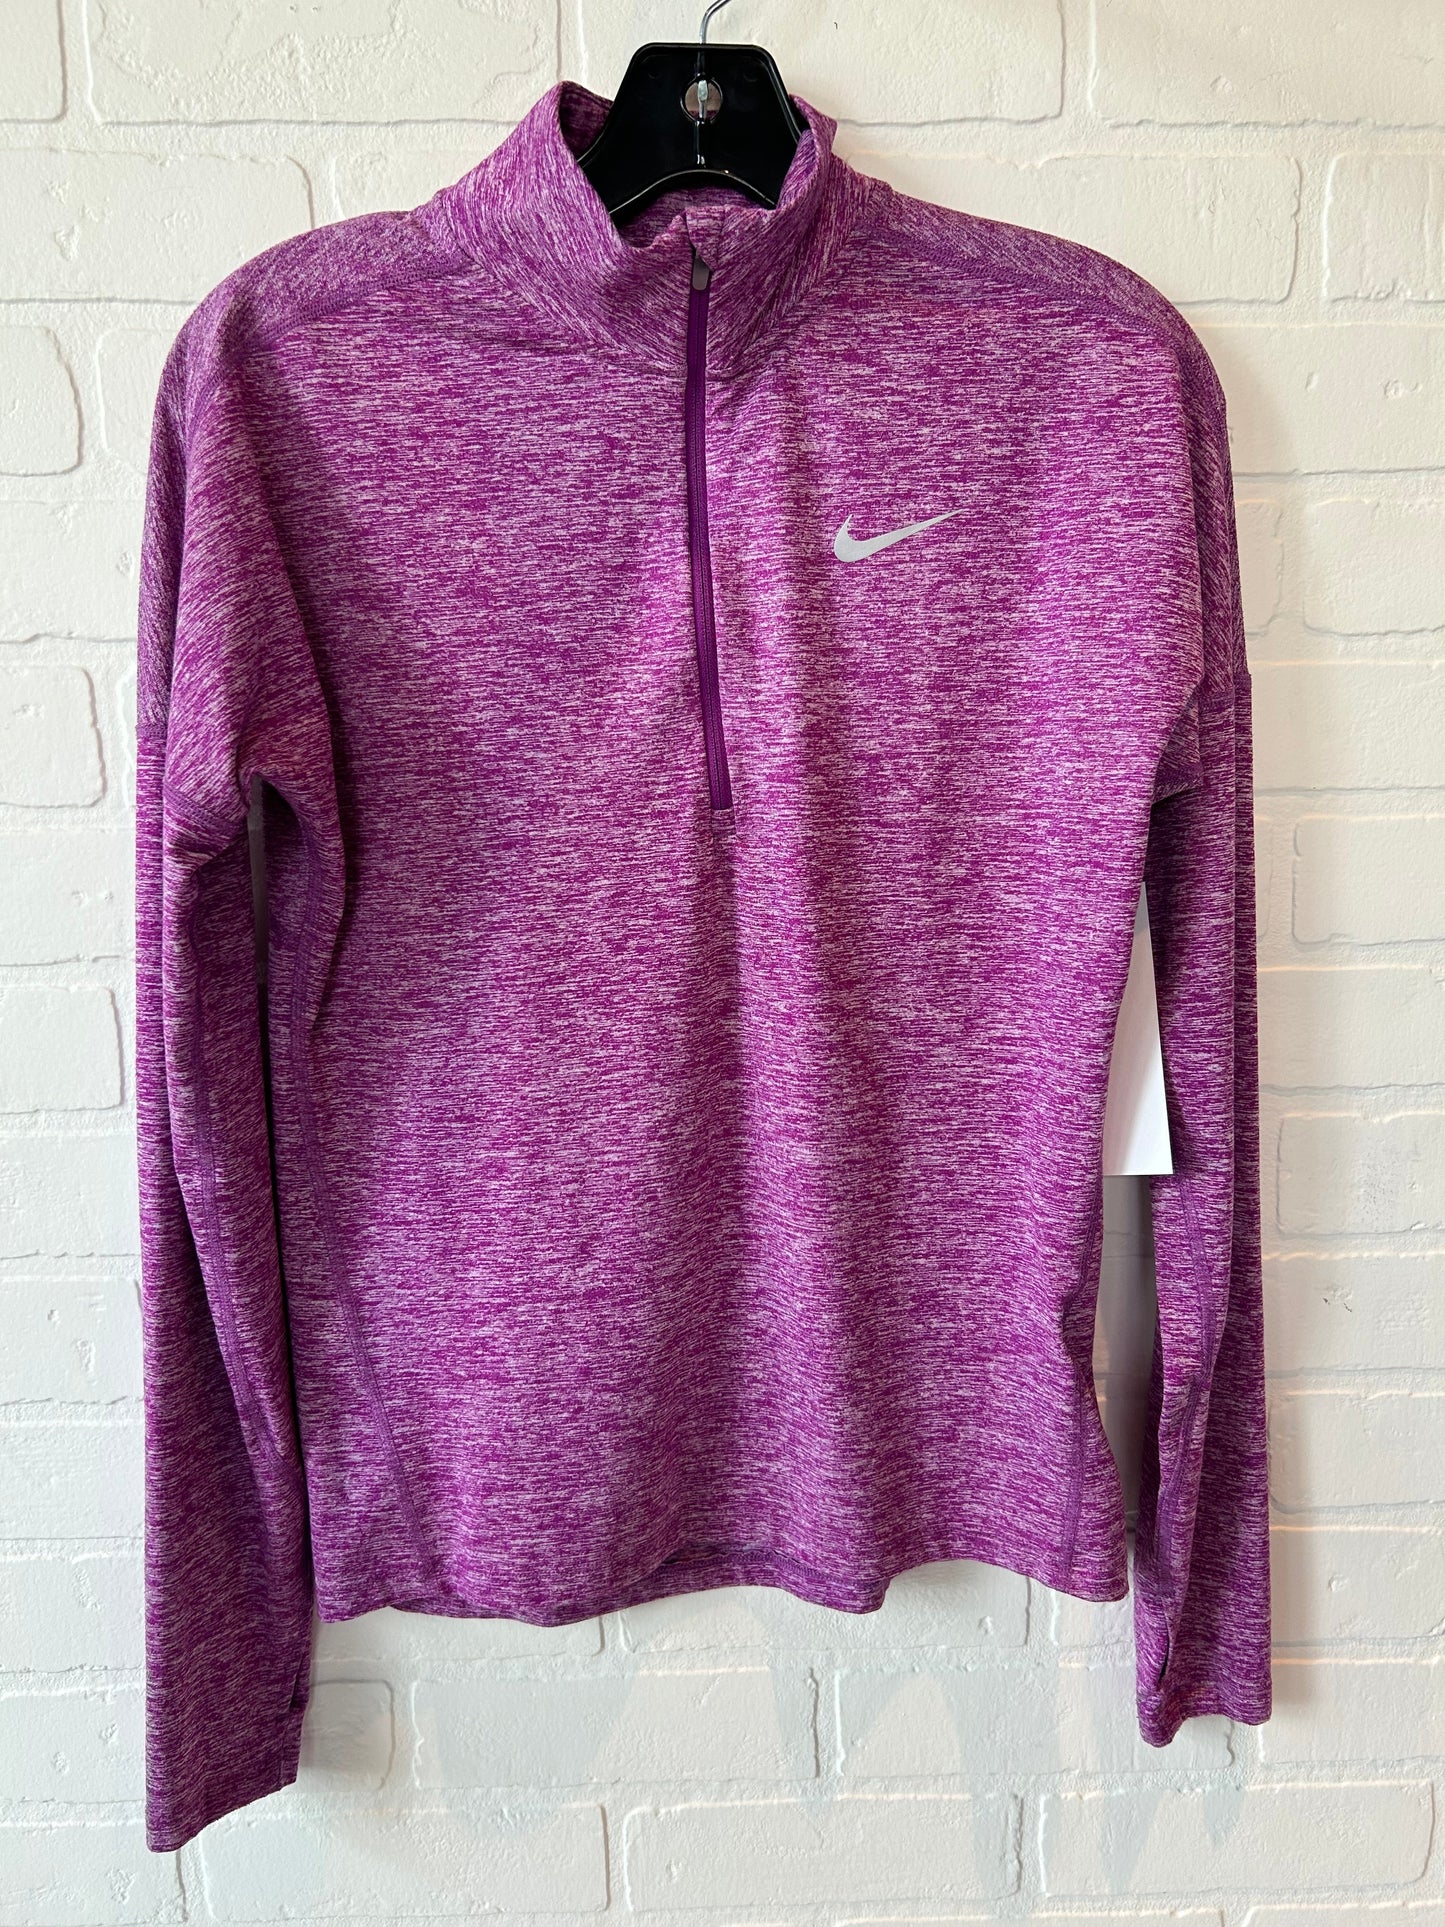 Purple Athletic Top Long Sleeve Collar Nike, Size Xs